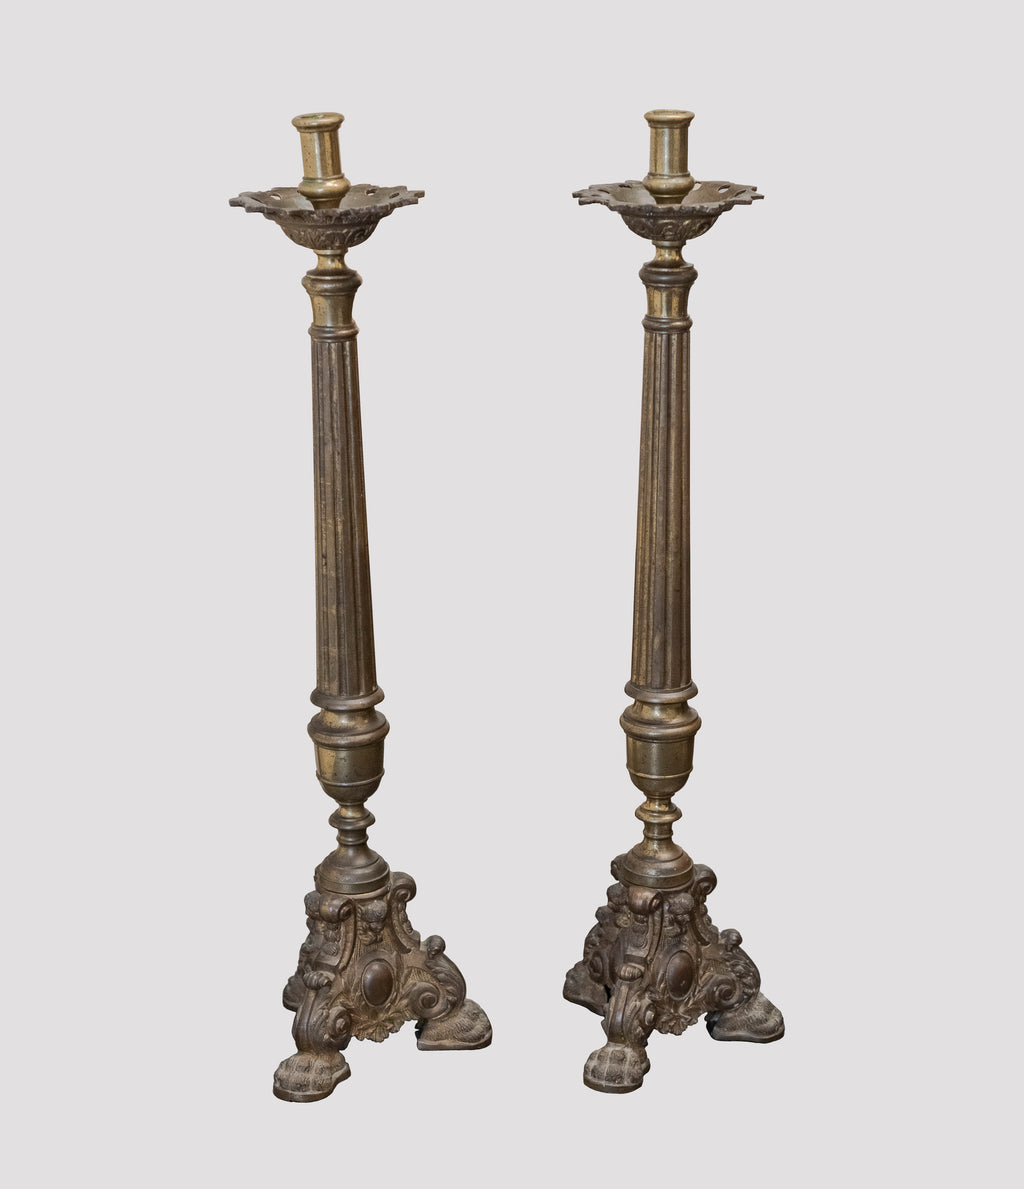 Sway Solid Brass Candlesticks - Anacua House